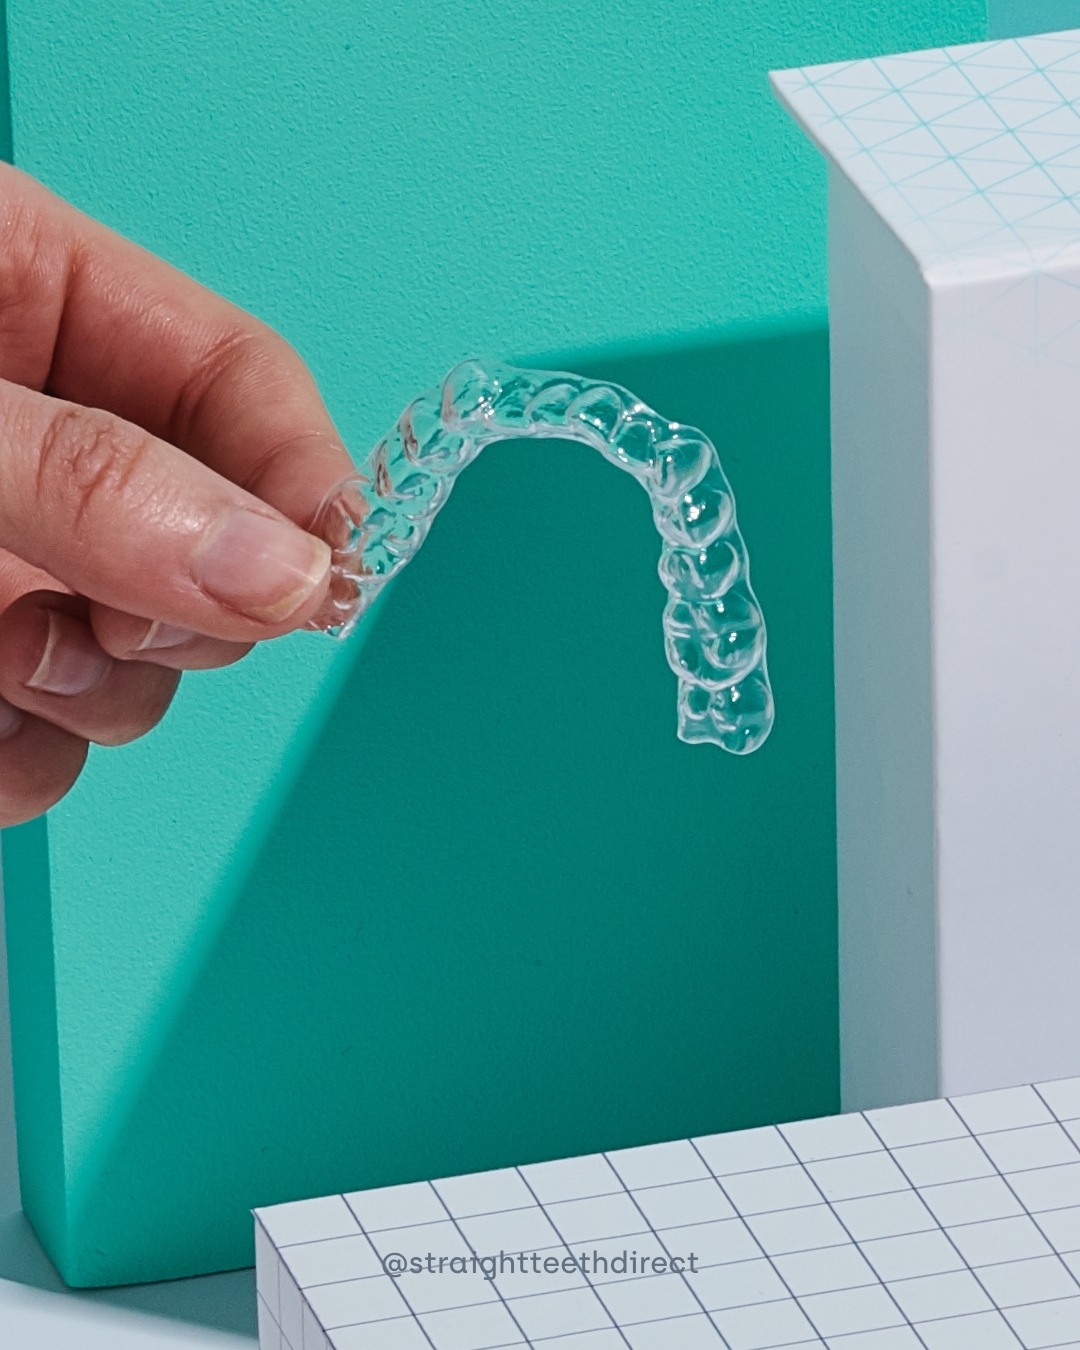 Clear aligner and hand